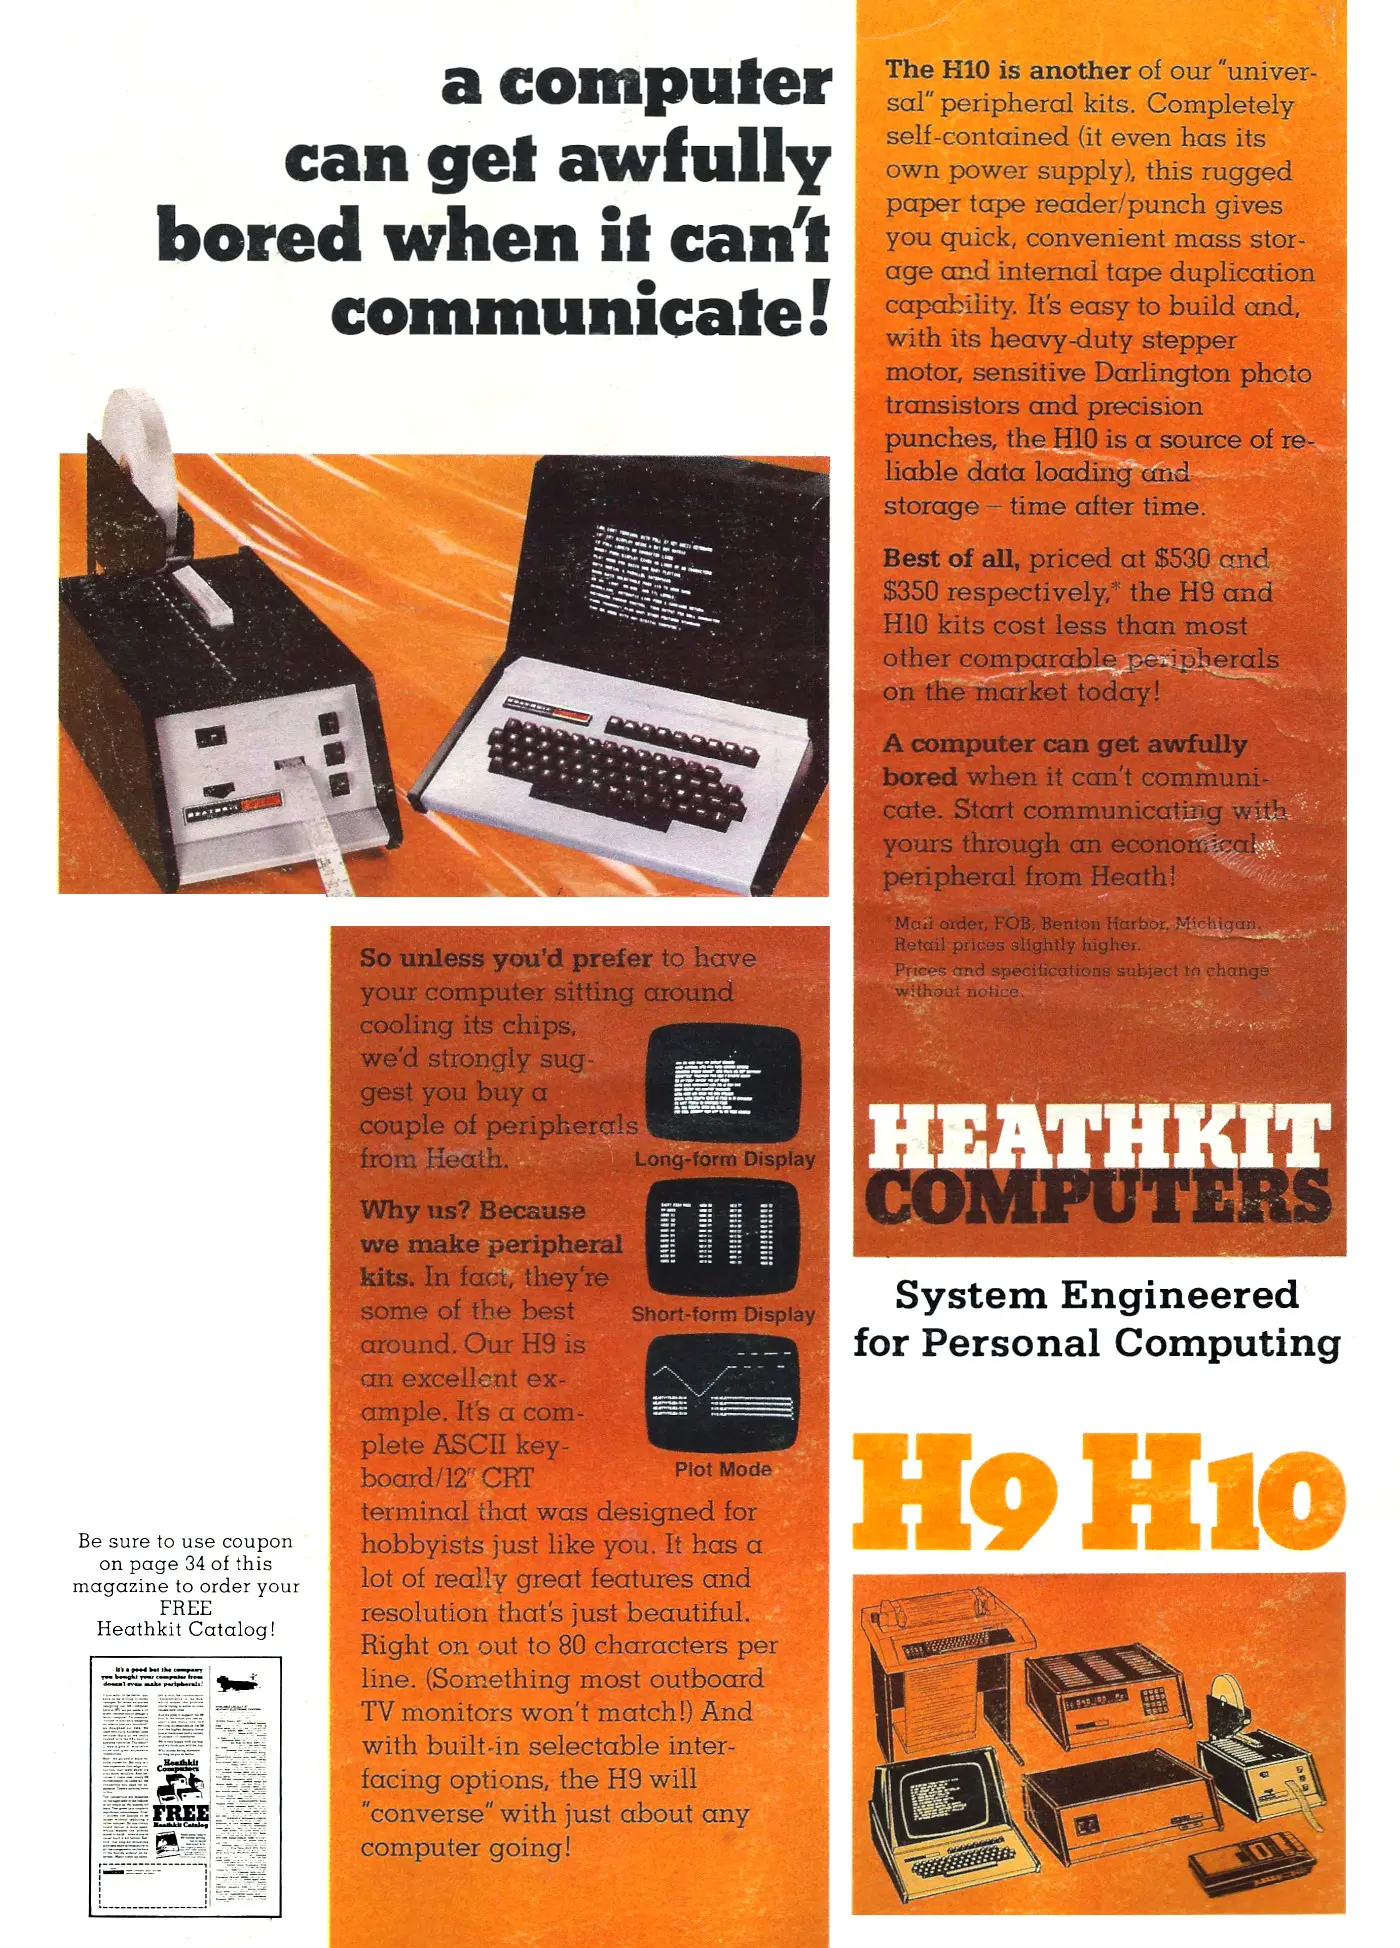 Heathkit Advert: A computer can get awfully bored when it can't communicate!, from Byte - The Small Systems Journal, April 1978